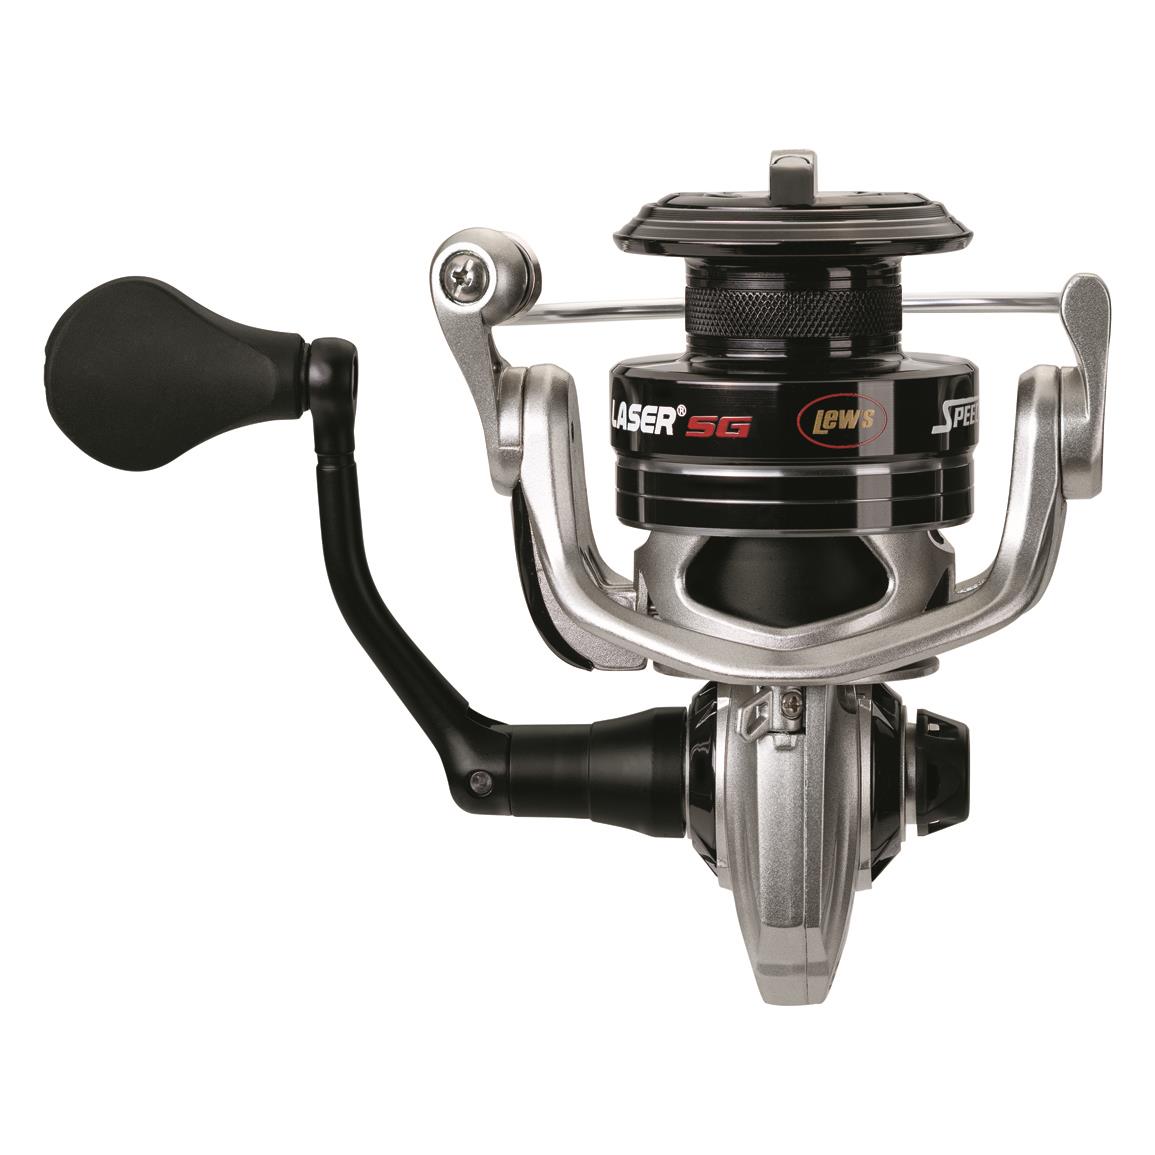 Mr. Crappie Crappie Thunder Pre-Spooled Spinning Reels - 732865, Spinning  Reels at Sportsman's Guide